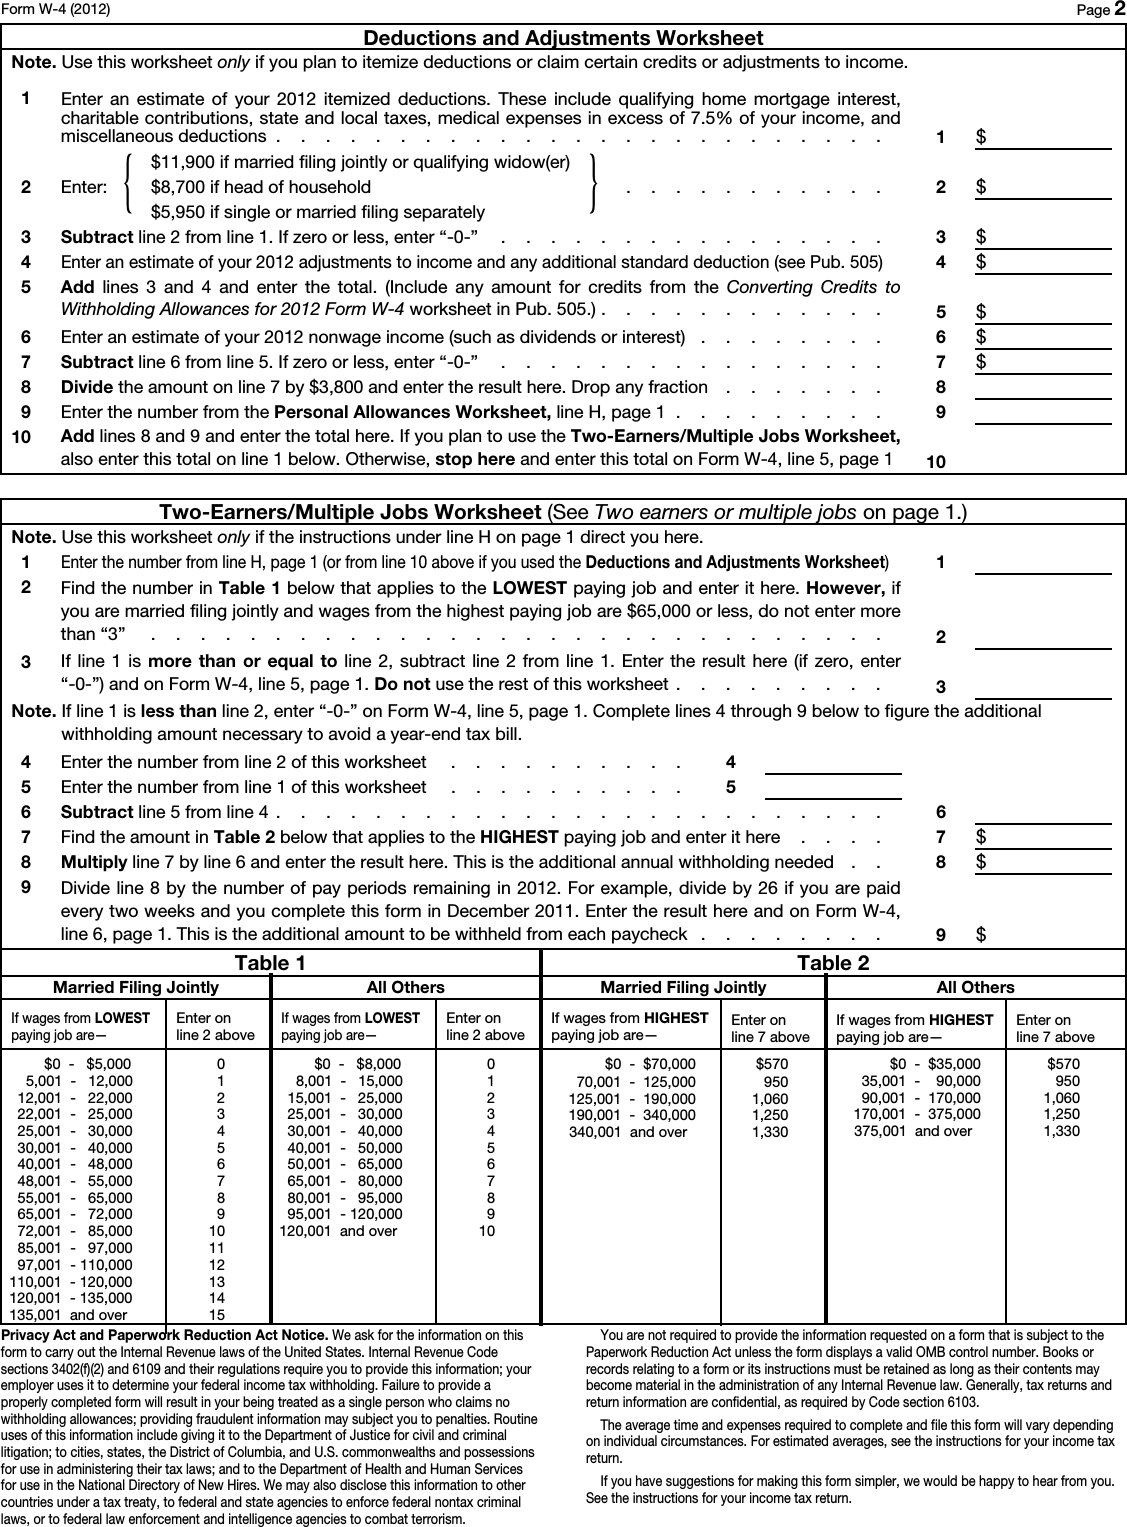 Page 2 of 2 - 10222 2  2012 Form W-4 User Manual